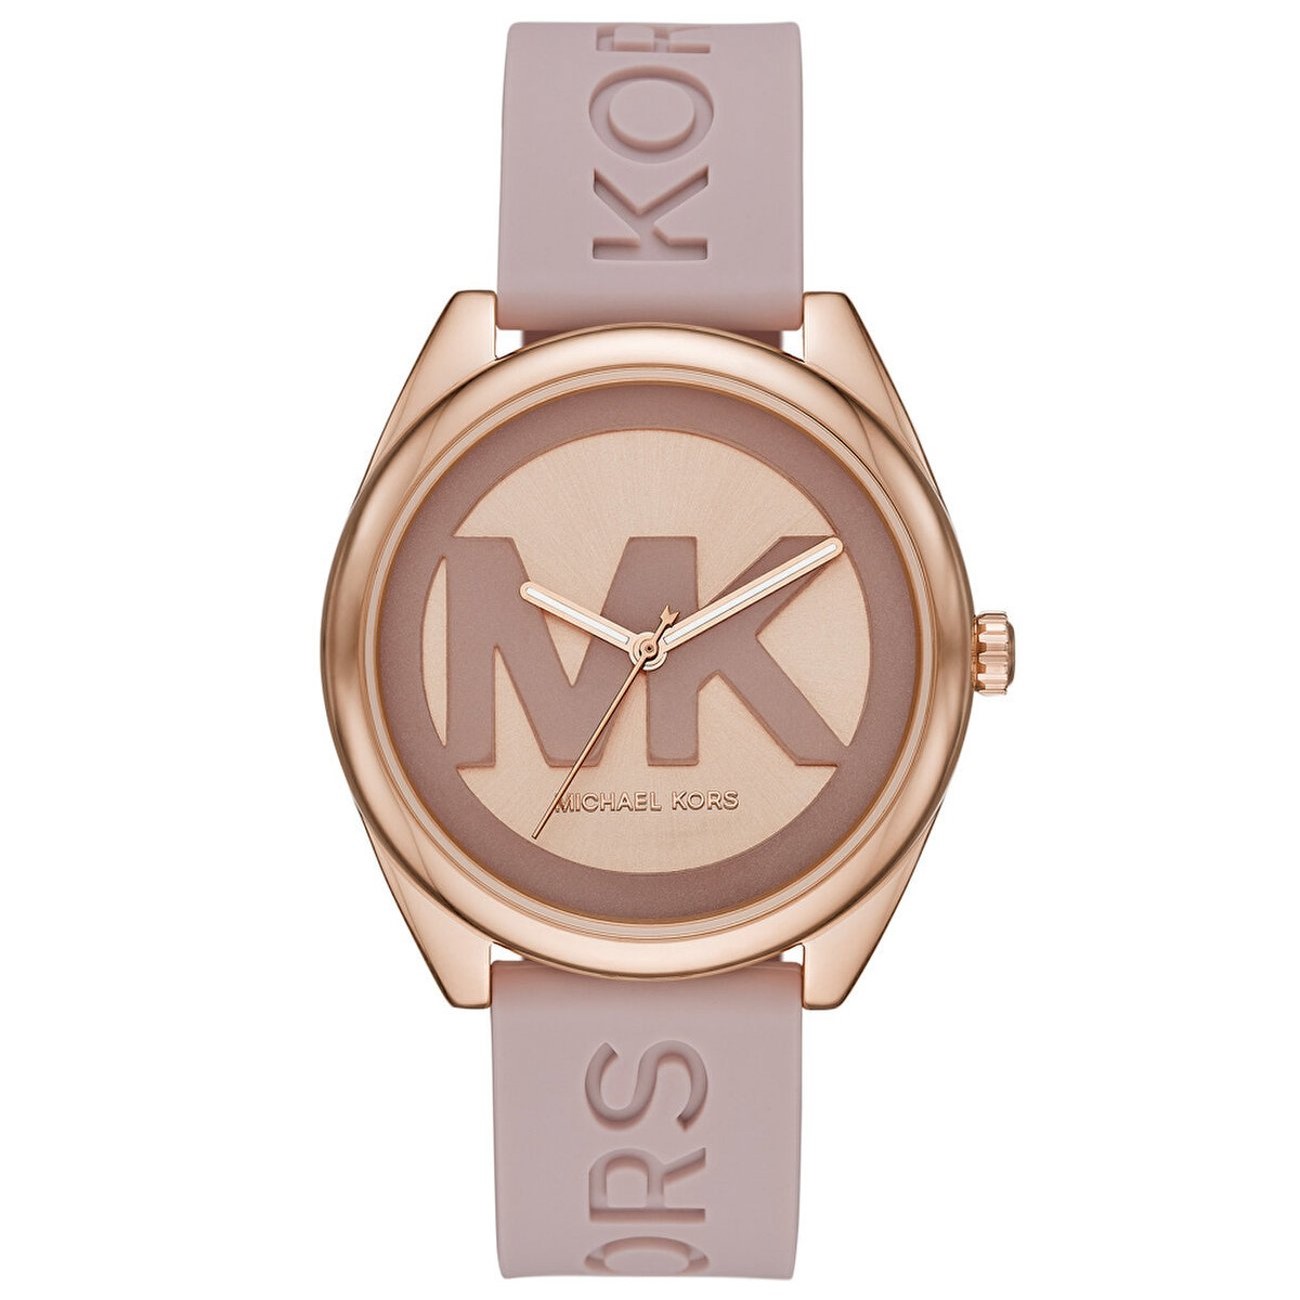 ĐỒNG HỒ ĐEO TAY NỮ MICHAEL KORS RUNWAY JANELLE ROSE GOLD PINK SILICONE WATCH MK7139 3